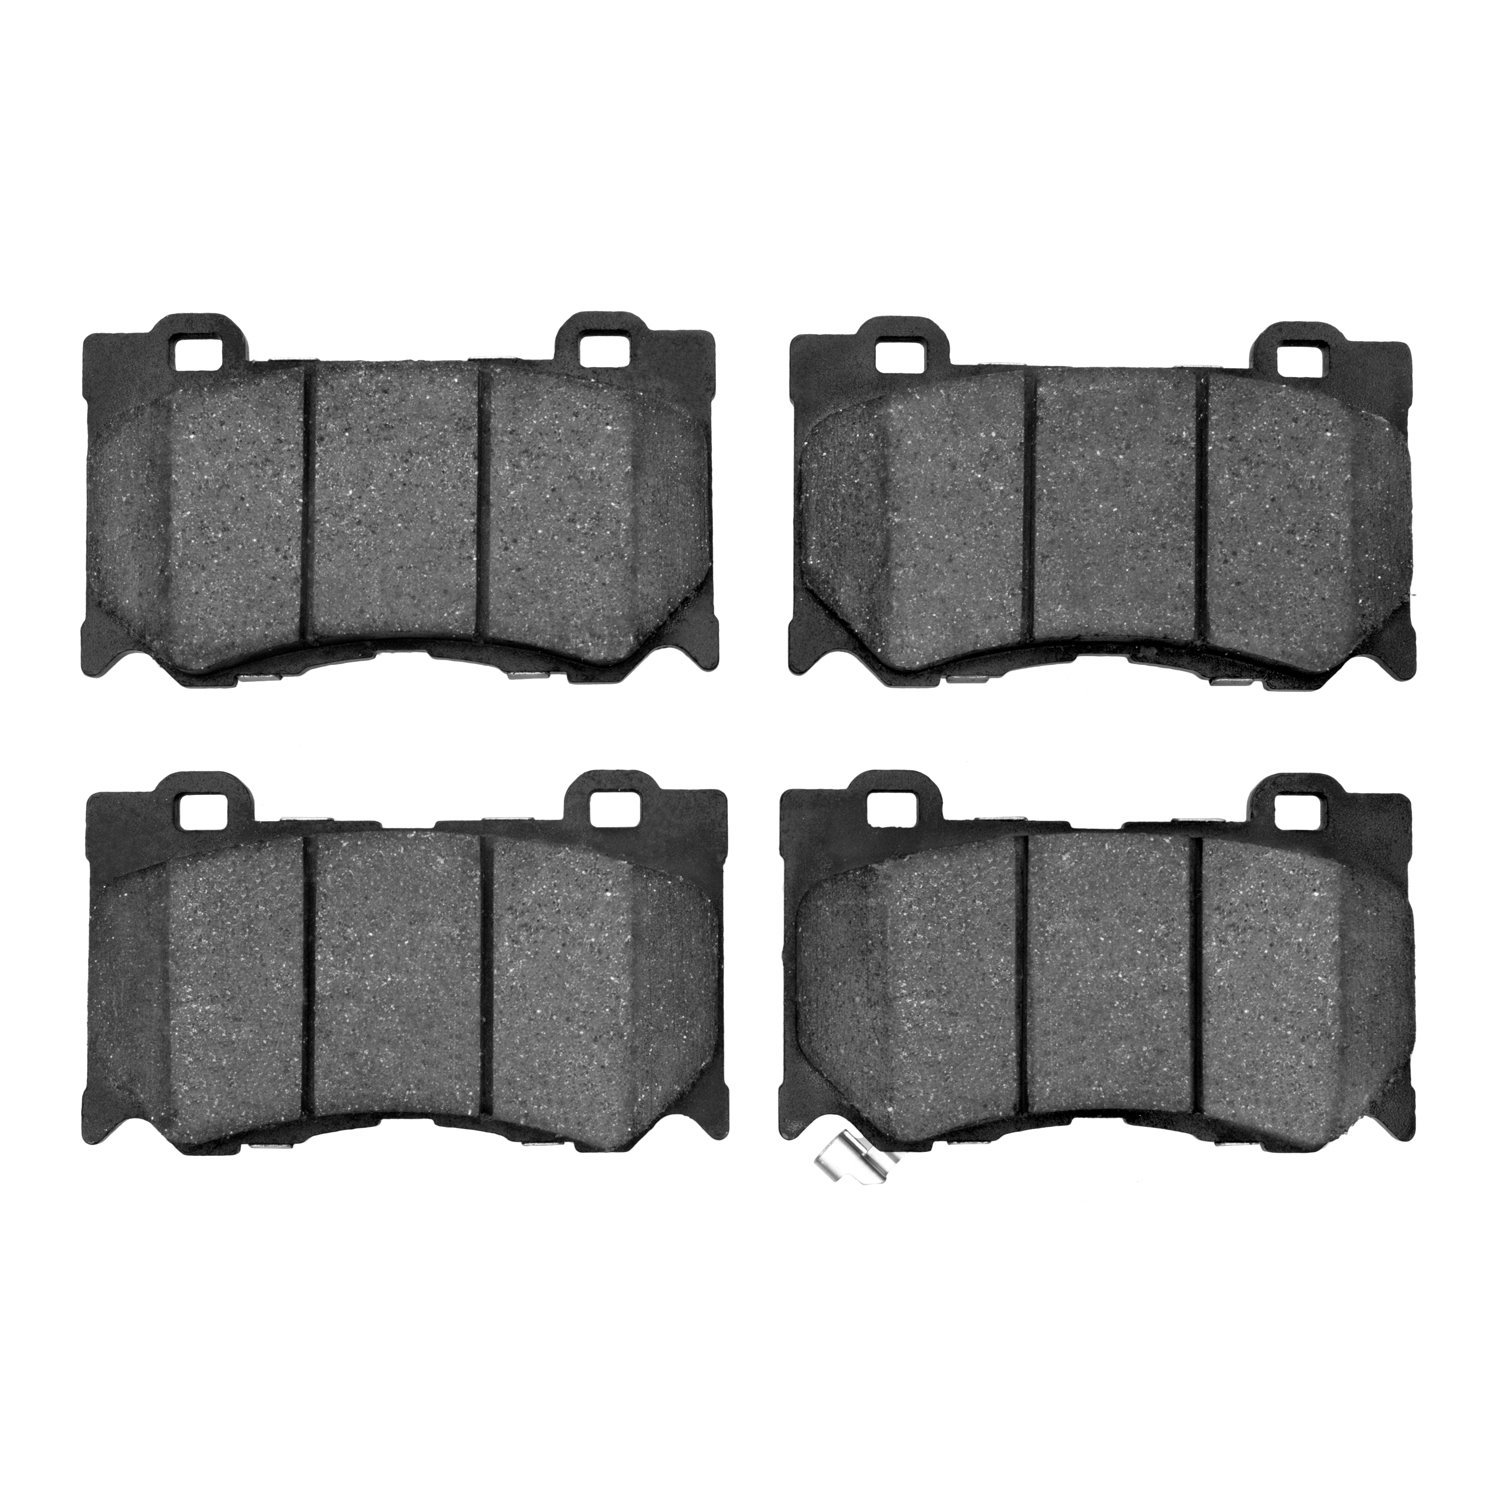 1115-1346-00 Active Performance Low-Metallic Brake Pads, Fits Select Infiniti/Nissan, Position: Front